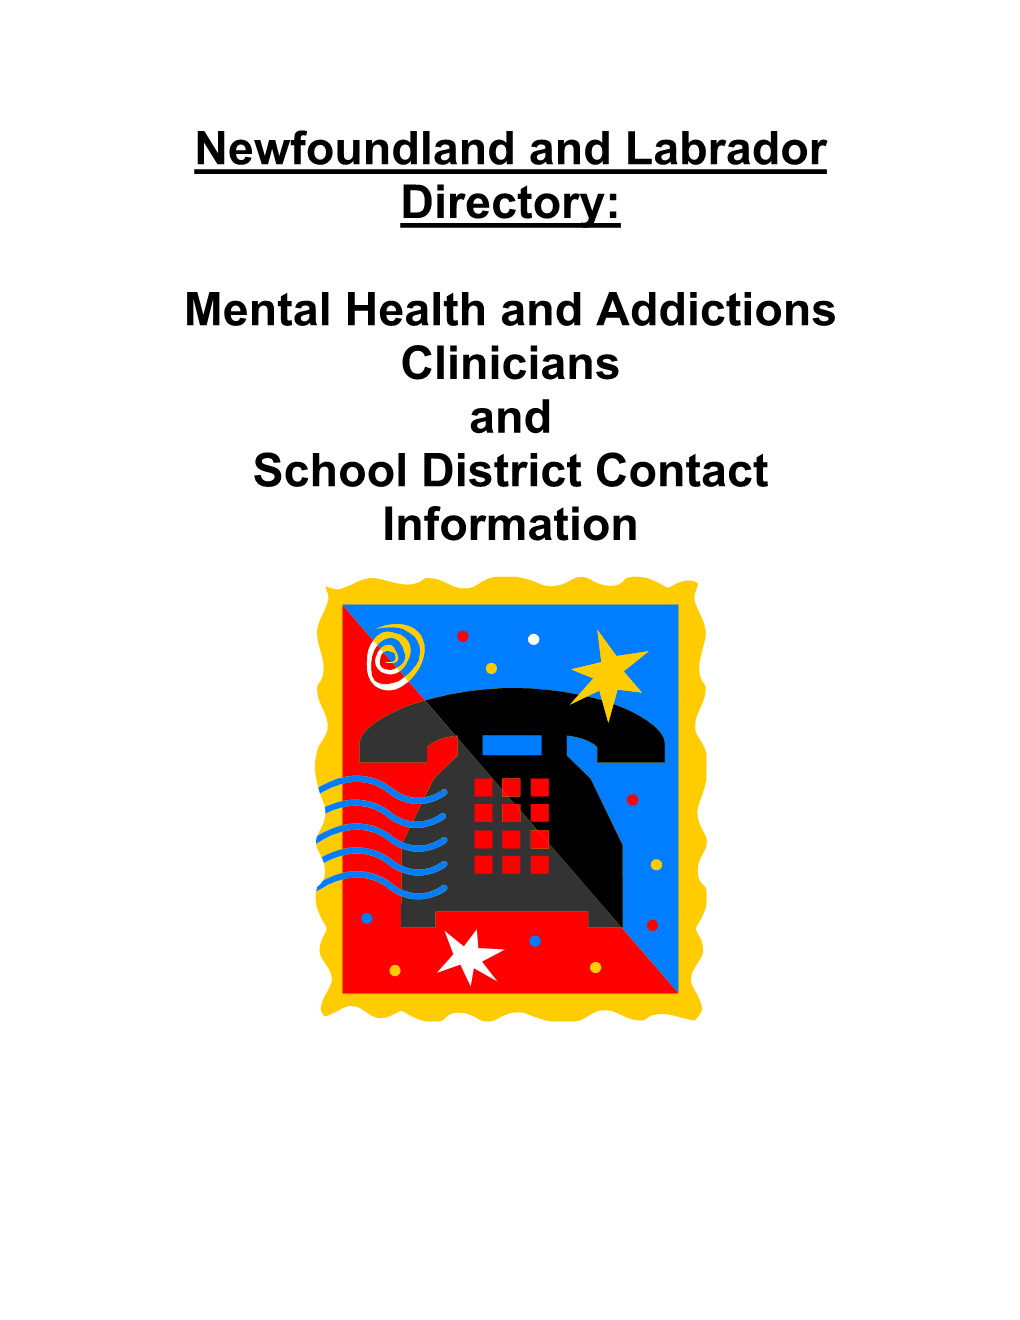 Mental Health and Addictions Clinicians Directory